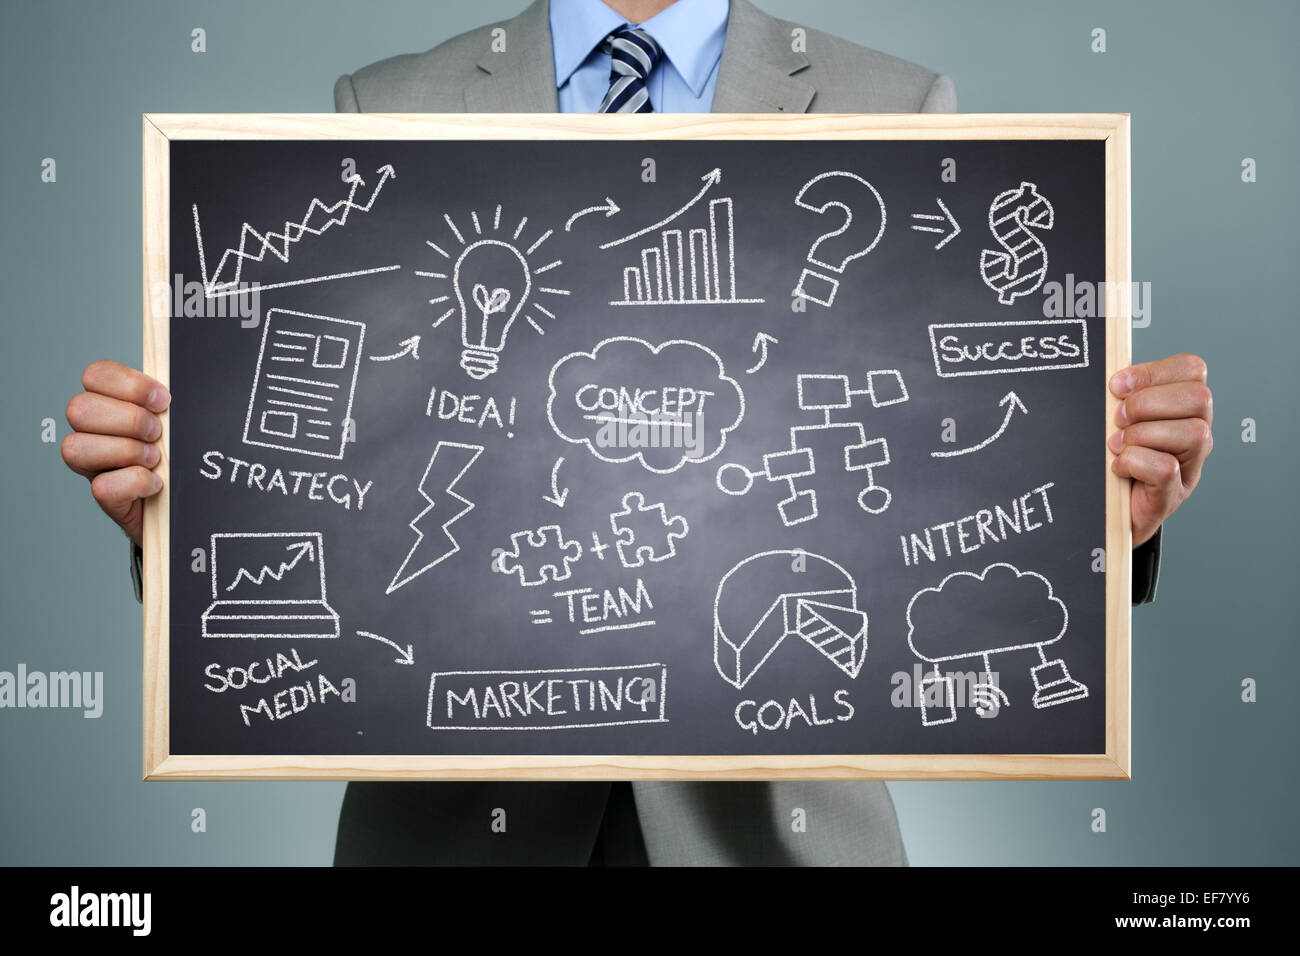 Business strategy concept businessman holding a blackboard with brainstorming chalk drawing of business creativity, imagination  Stock Photo